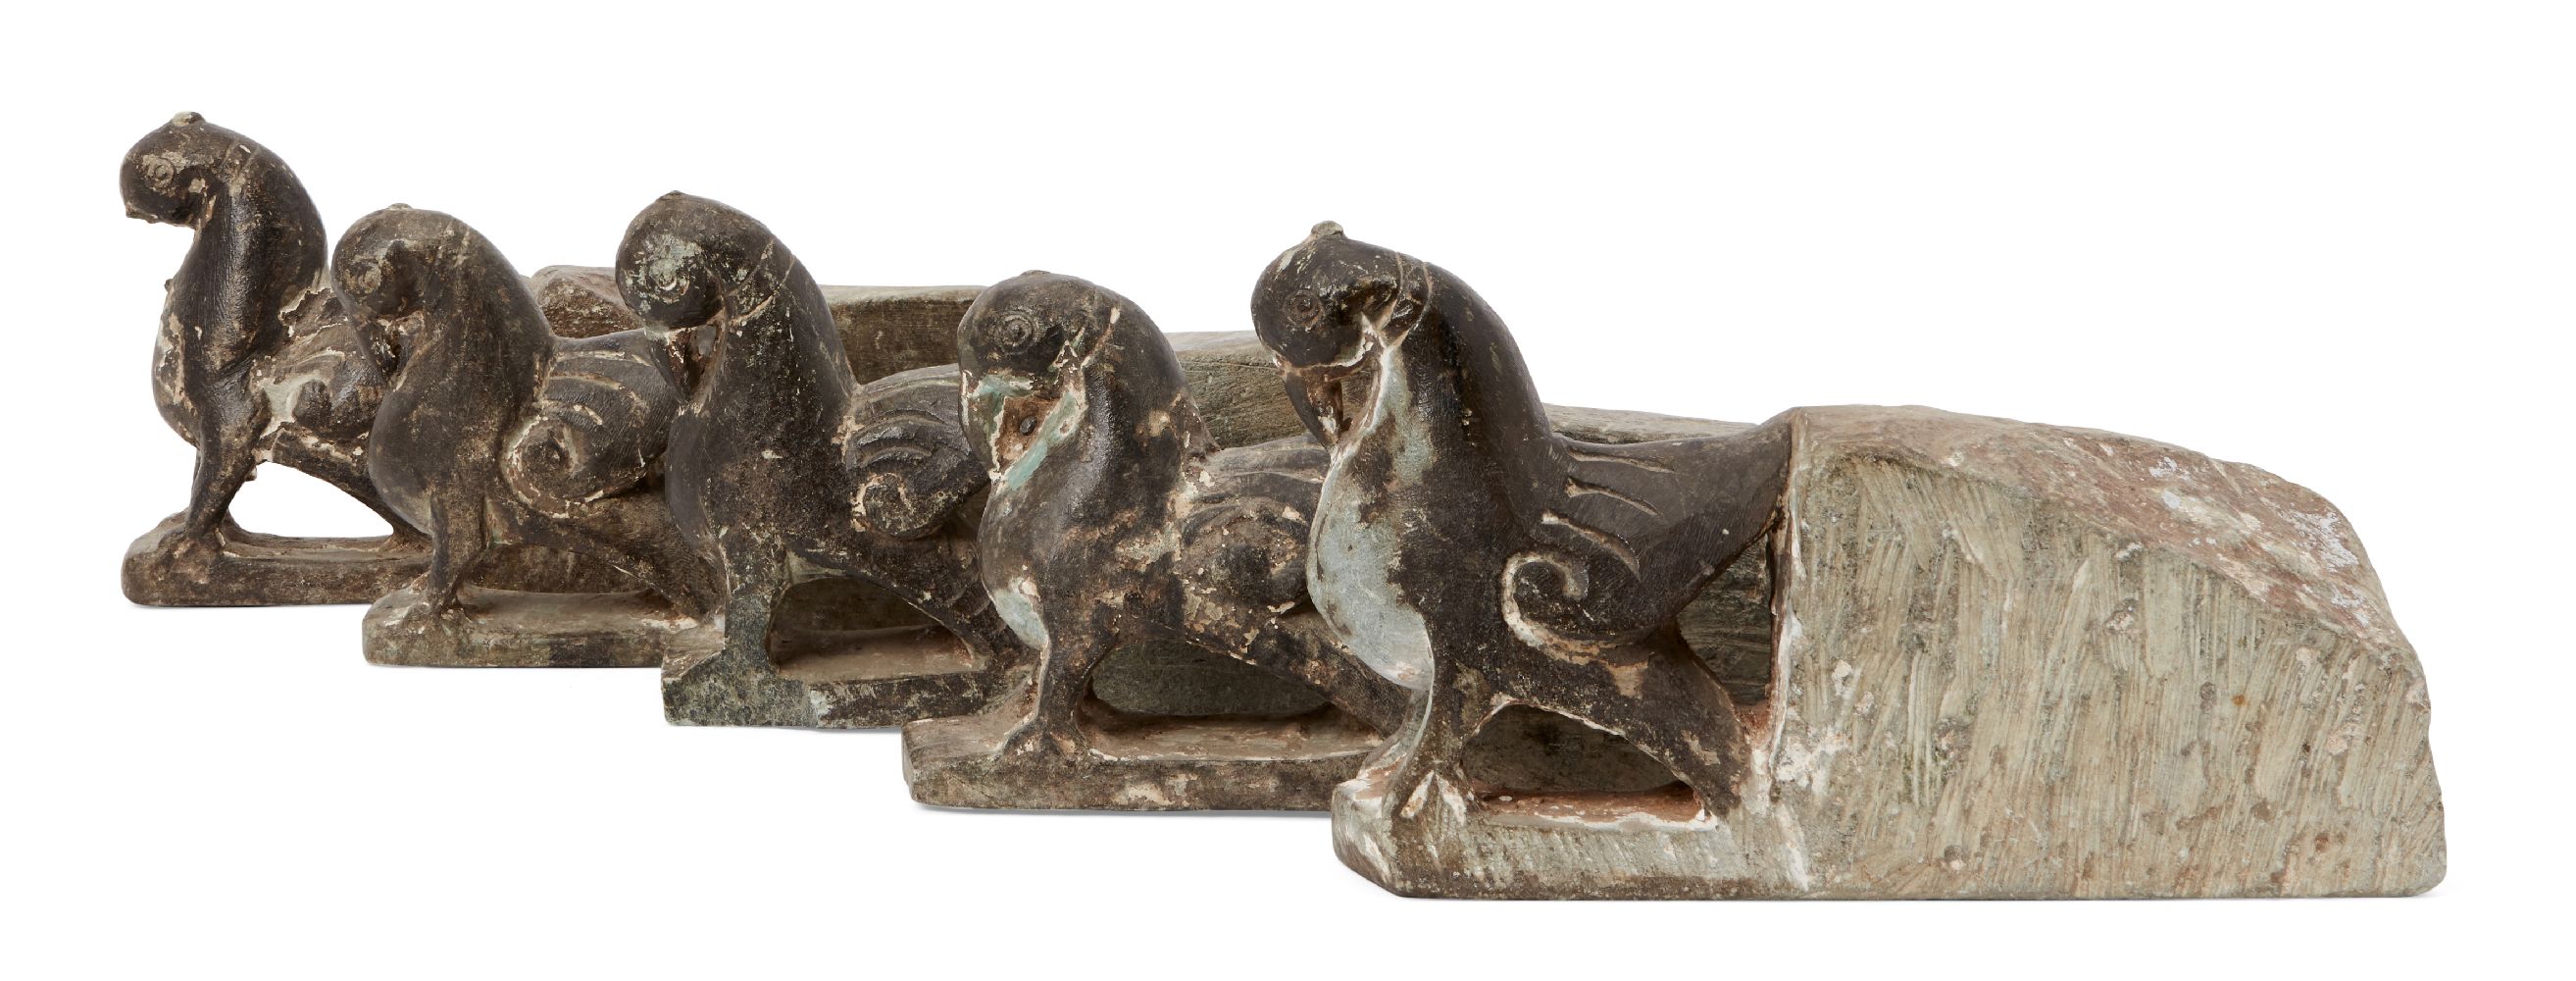 A group of 5 stone architectural brackets in the form of birds, India, 18th-19th century, with - Image 2 of 2